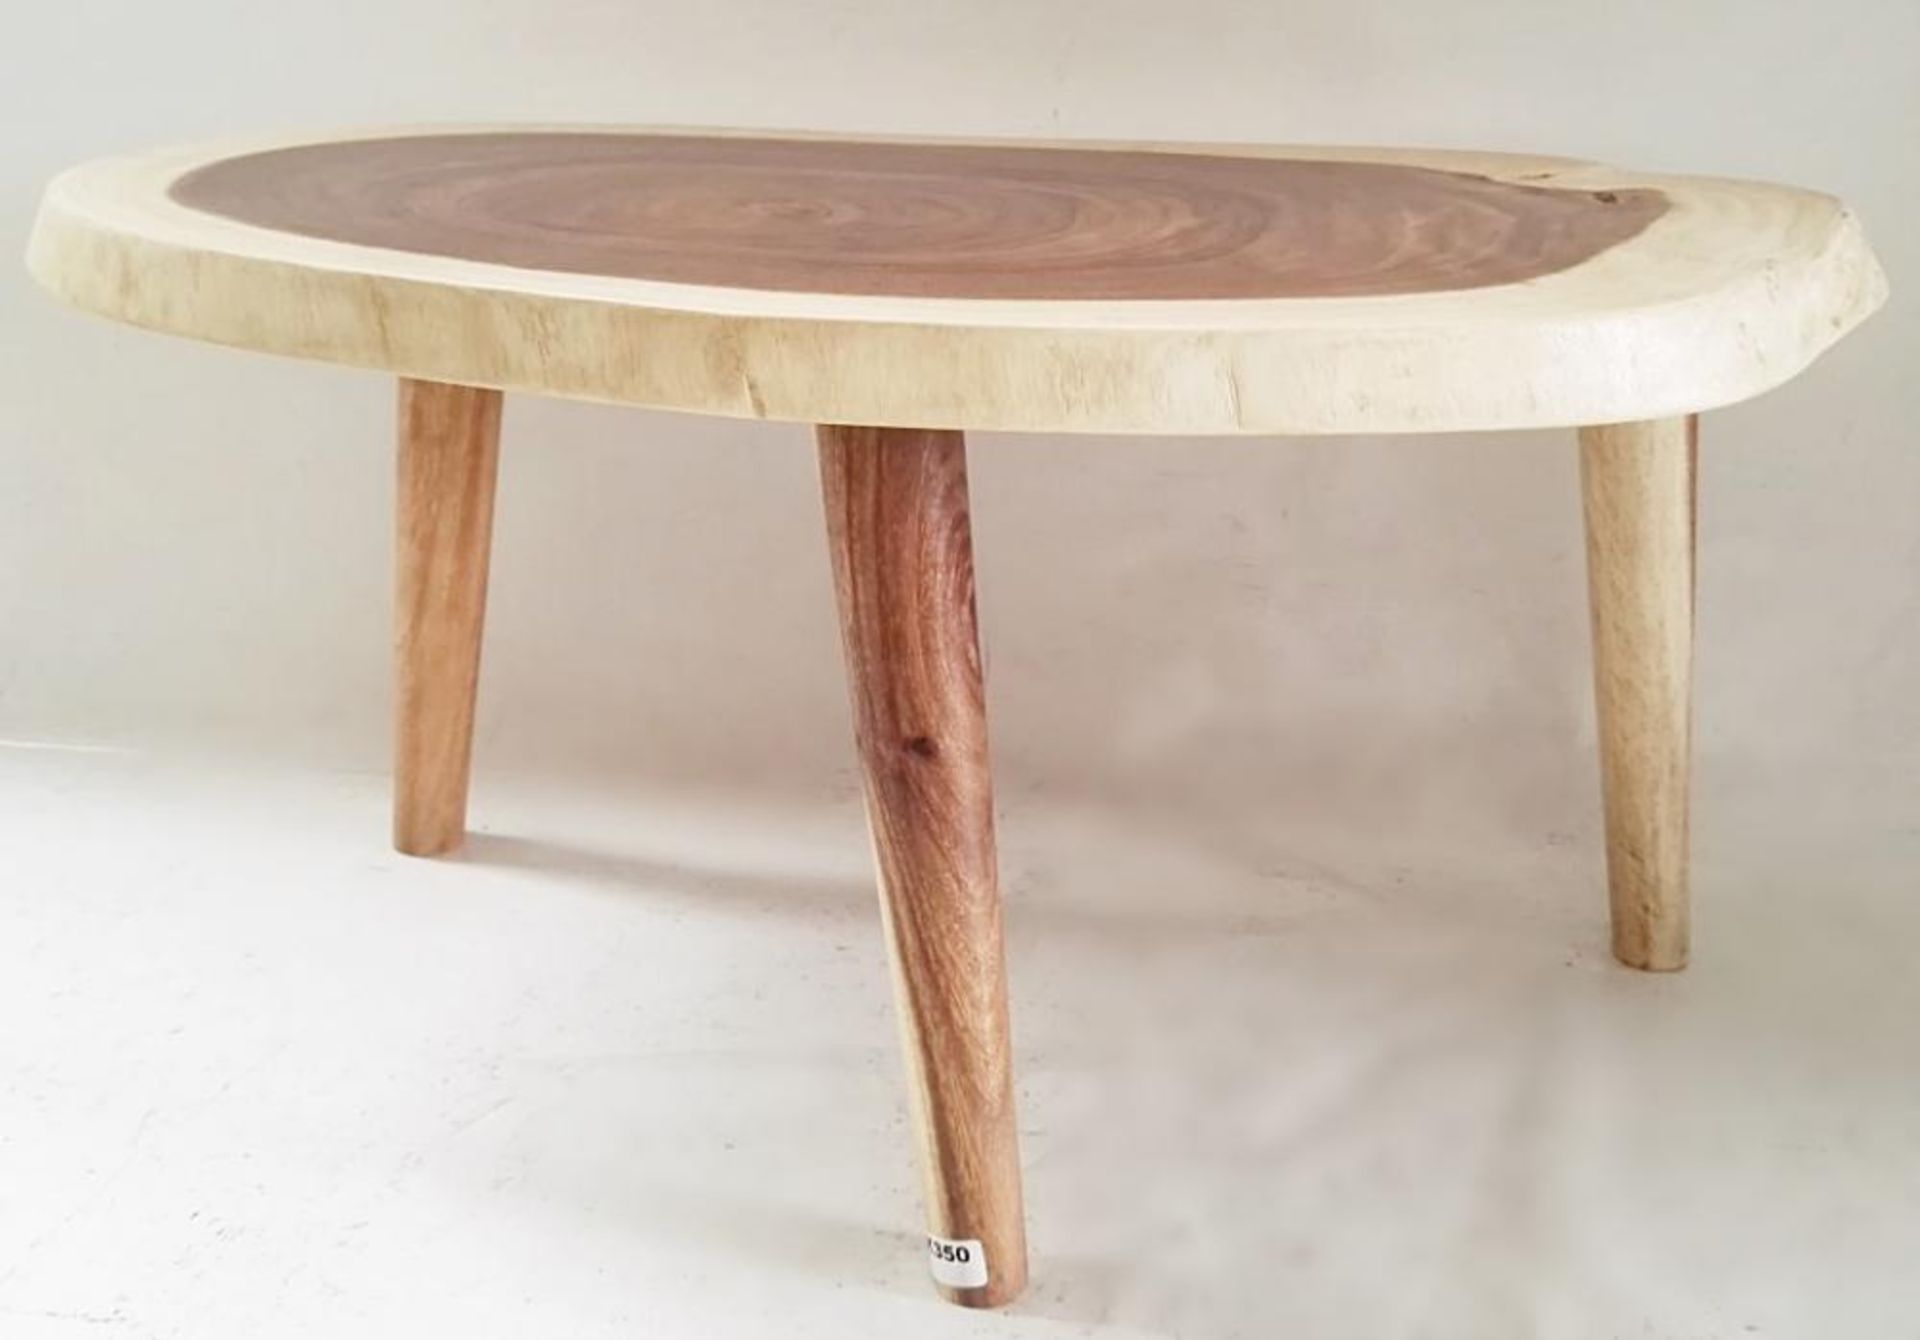 1 x Unique Three Legged Reclaimed Solid Tree Trunk Coffee Table - Dimensions (approx): W90 x D56cm, - Image 4 of 5